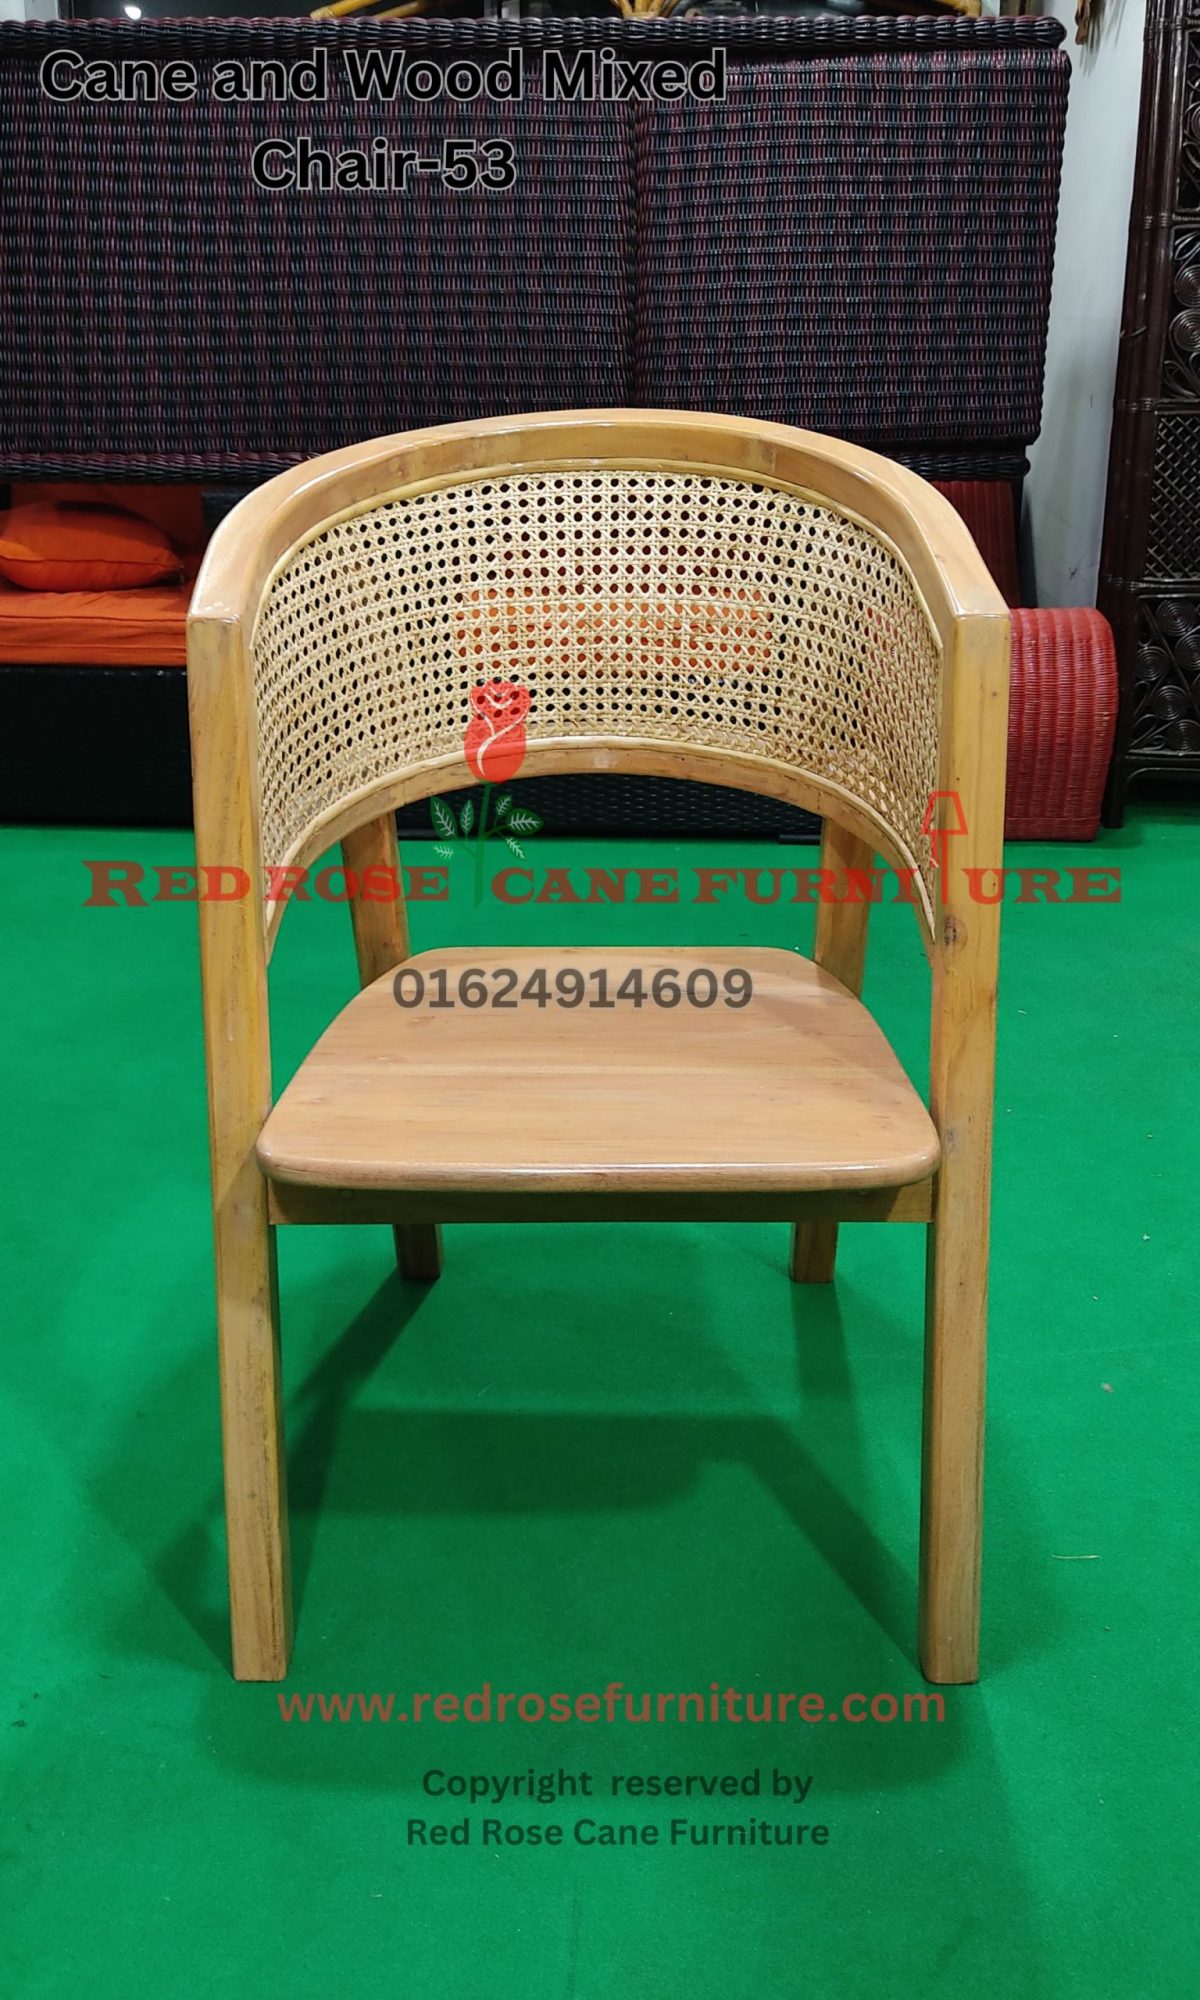 Cane and Wood Mixed Chair-53